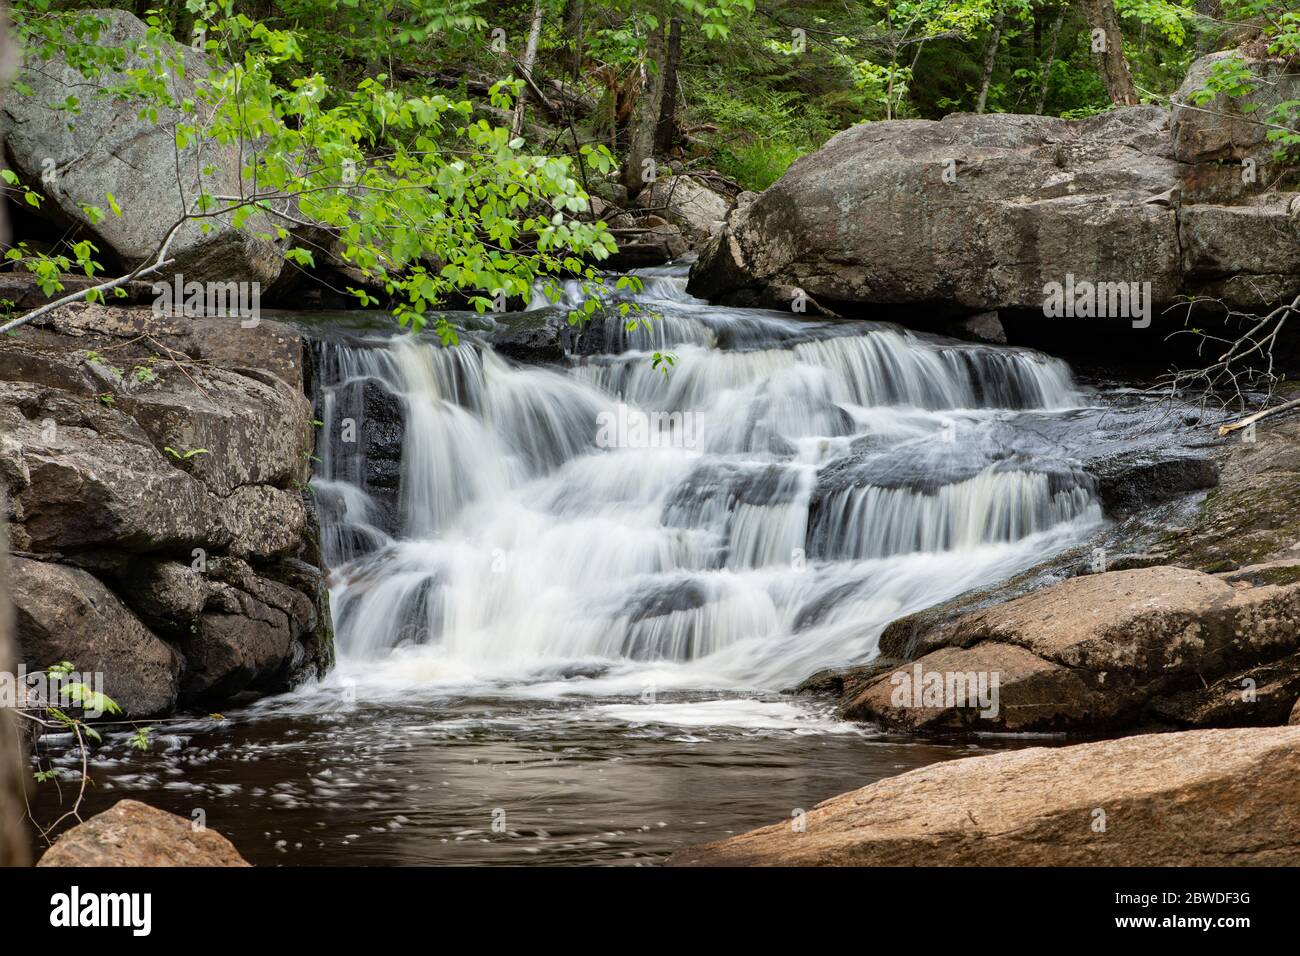 A small unnamed waterfall on Hatchery Brook in the Adirondack Mountains near Speculator, NY USA Stock Photo